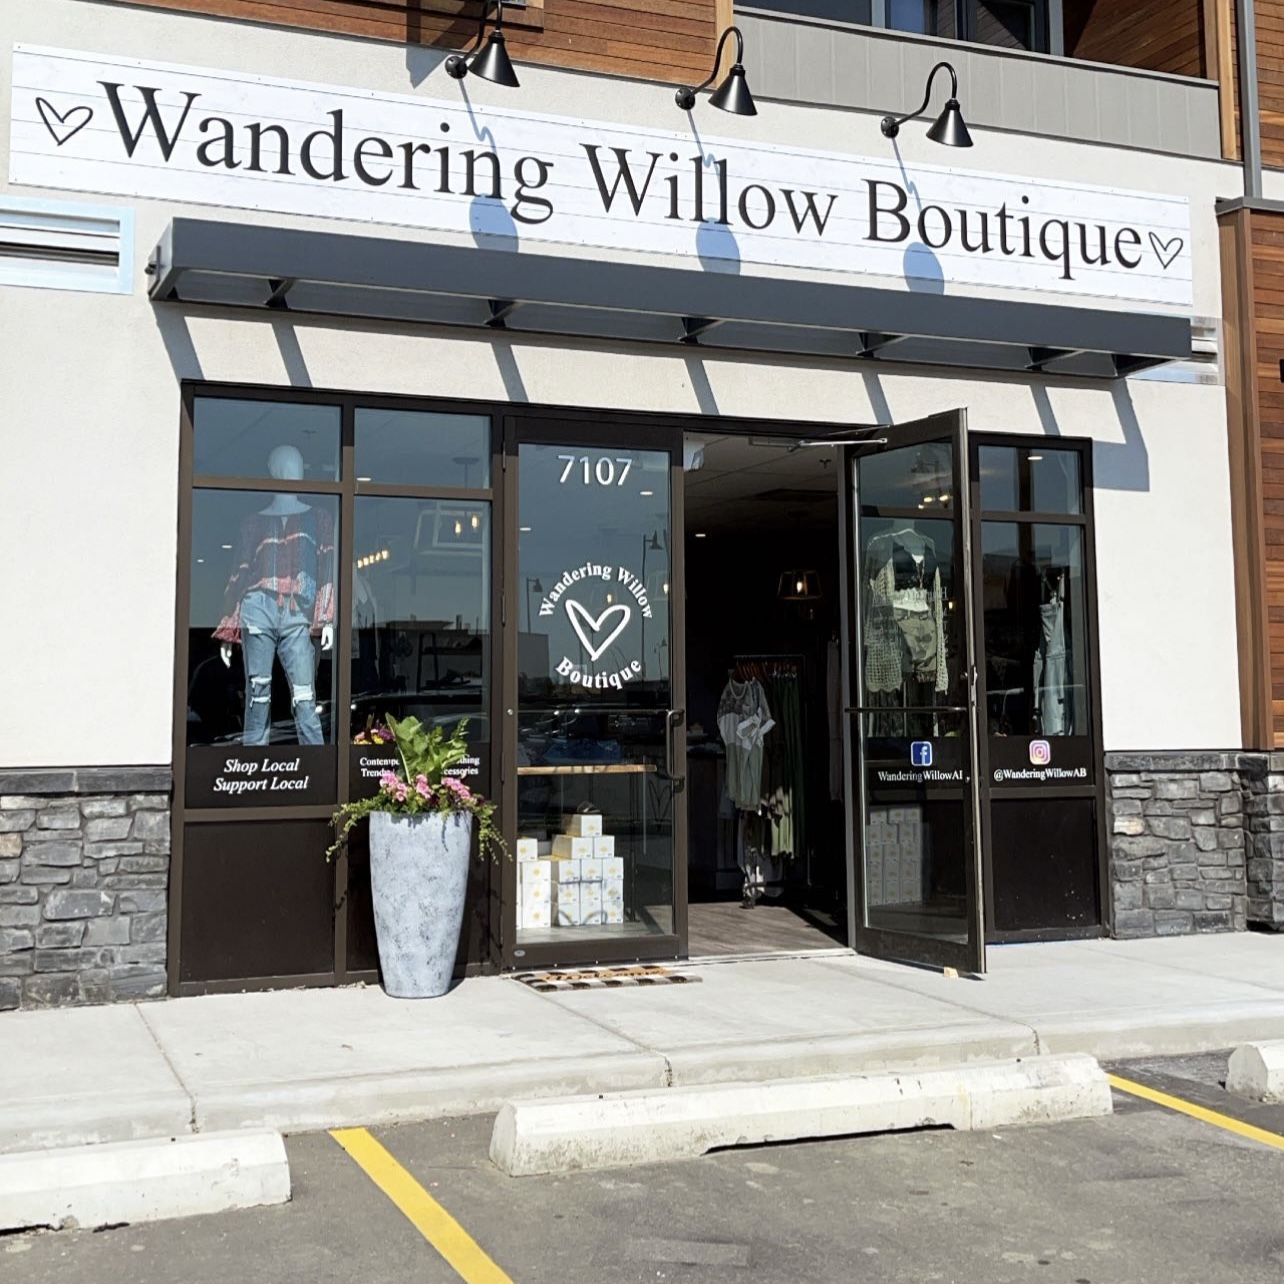 Wandering Willow Boutique